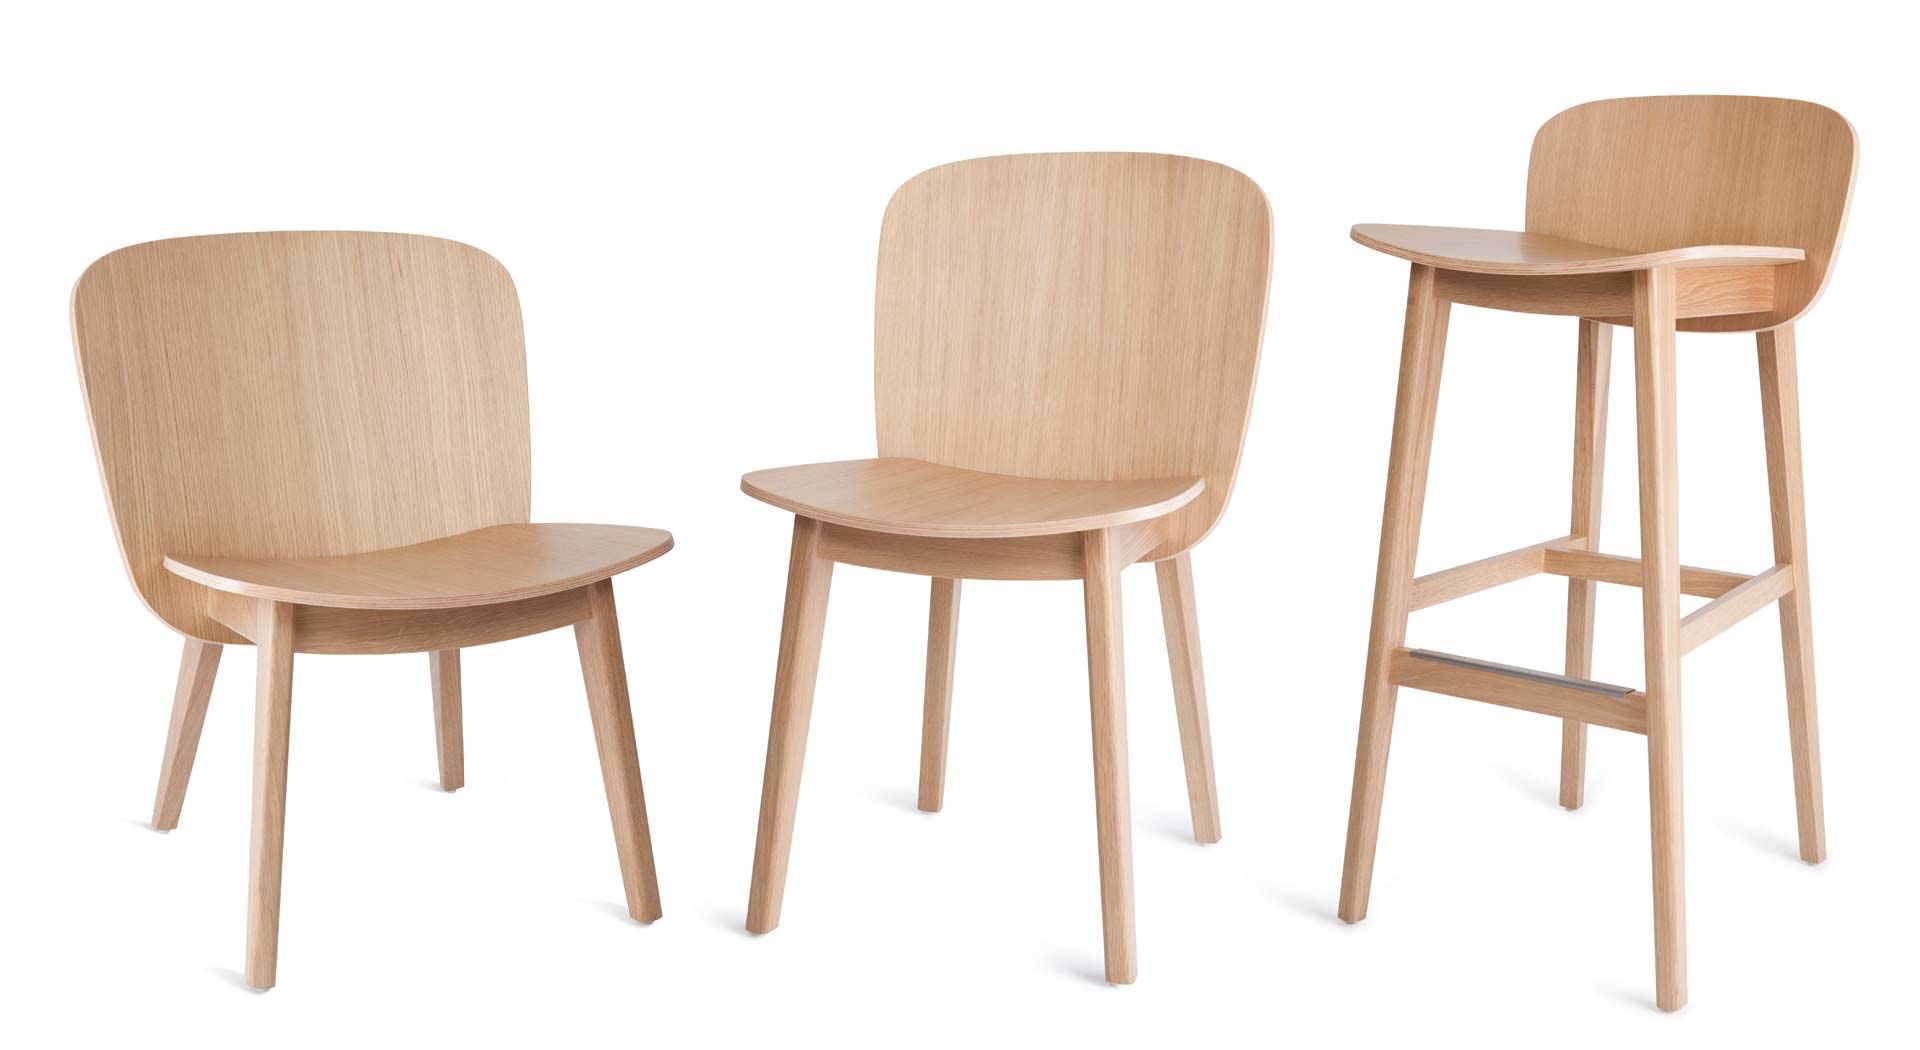 EPIC Chairs by Marc Th. van der Voorn for Z-editions